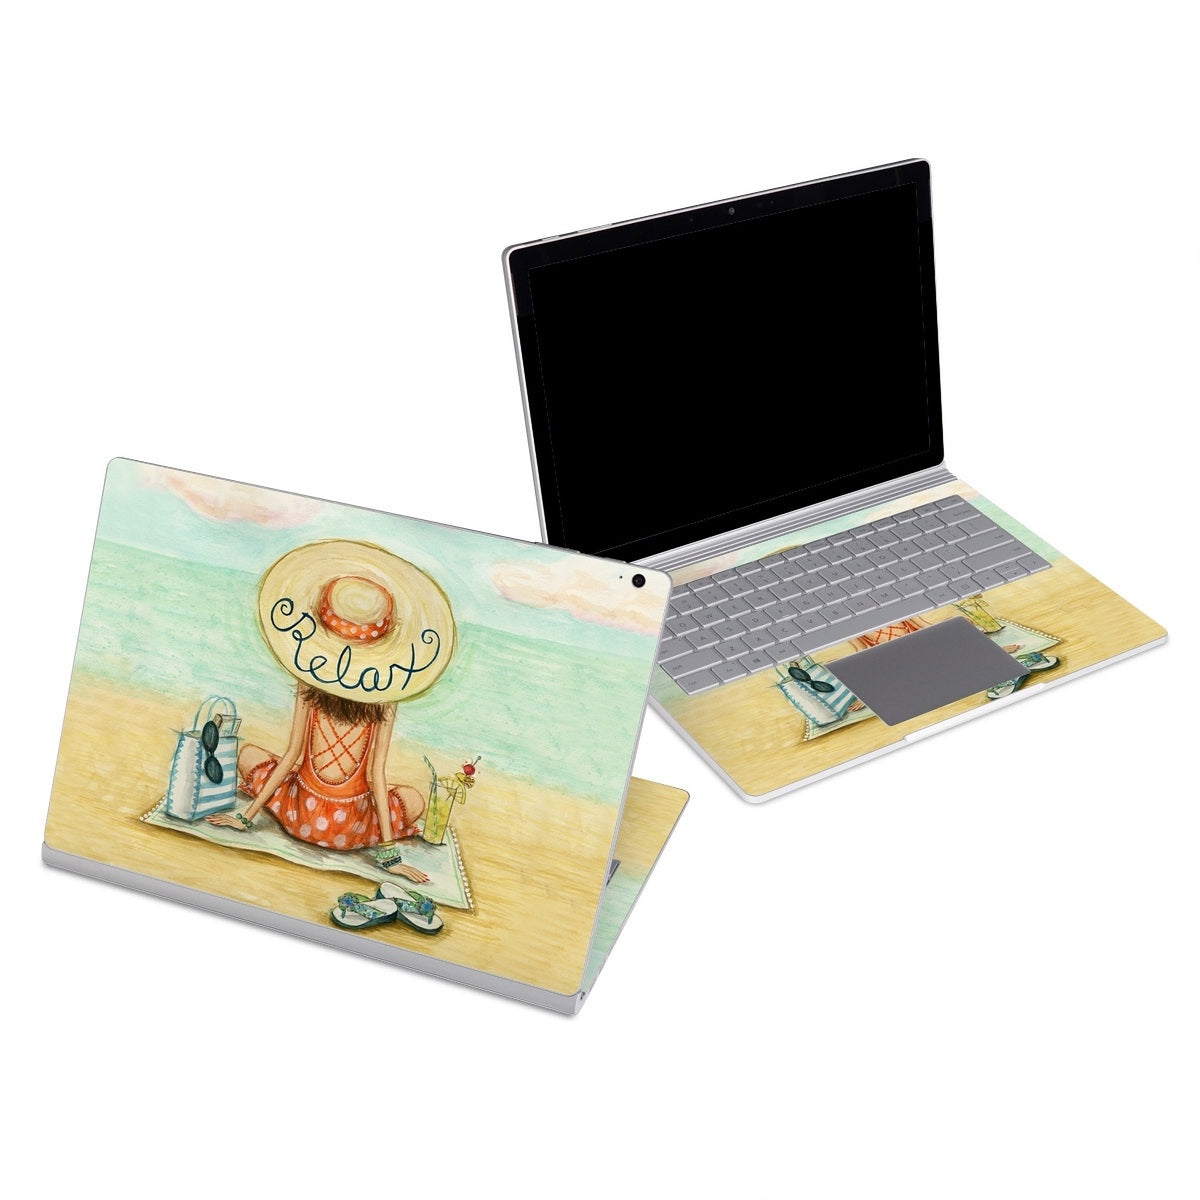 Relaxing on Beach - Microsoft Surface Book Skin